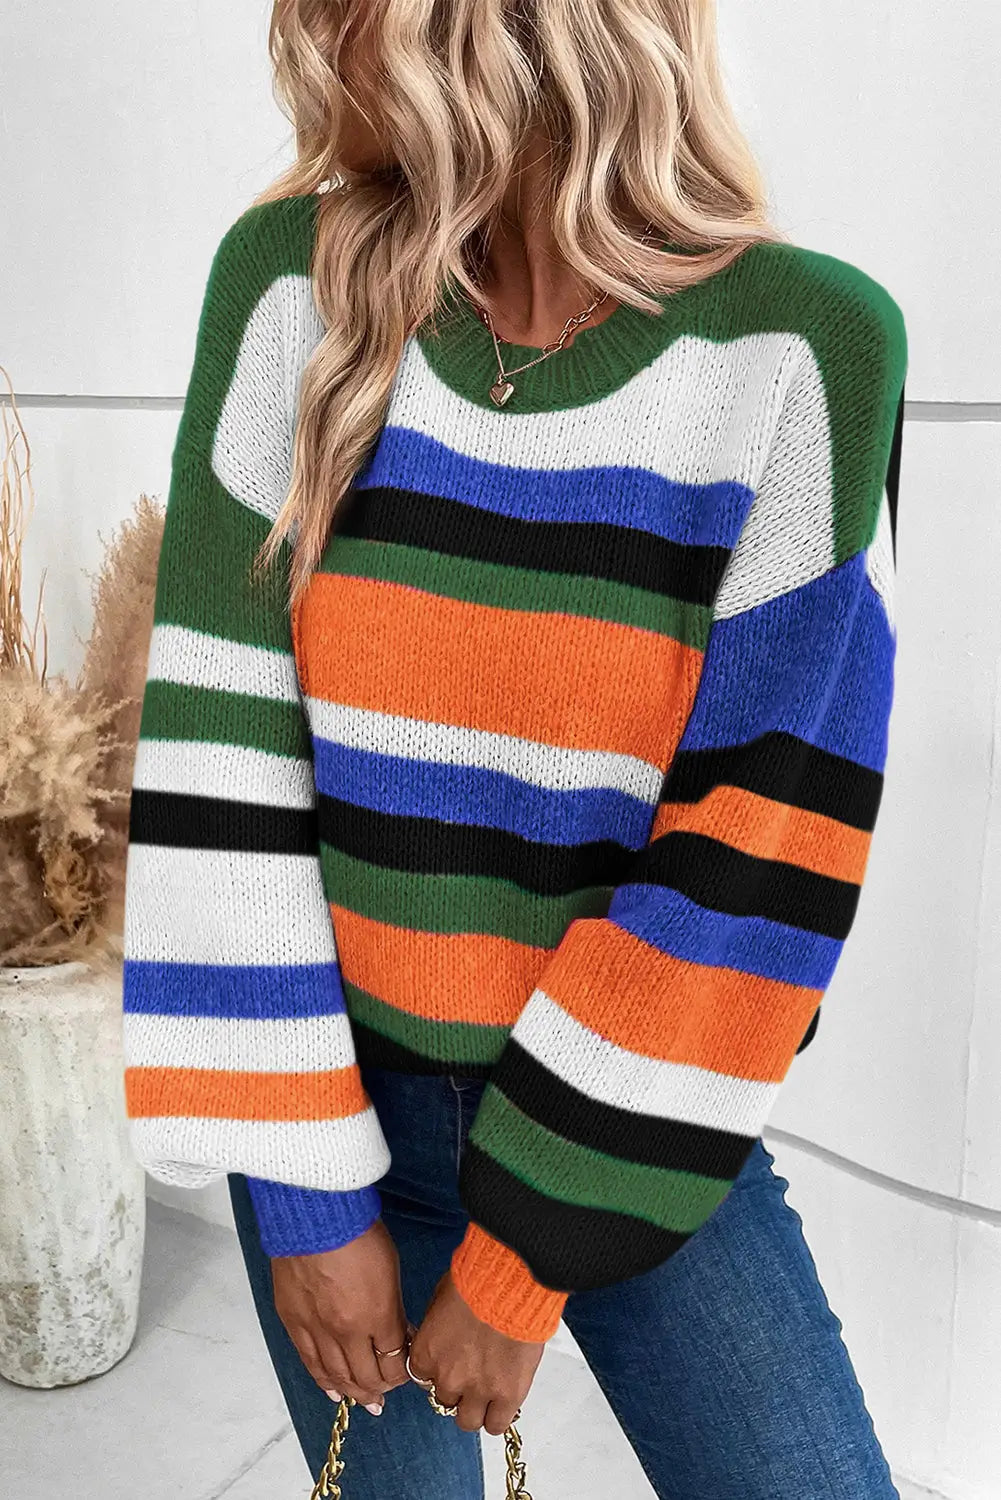 Multicolor striped knit drop shoulder puff sleeve sweater - multicolour1 / l / 60% acrylic + 40% polyamide - tops